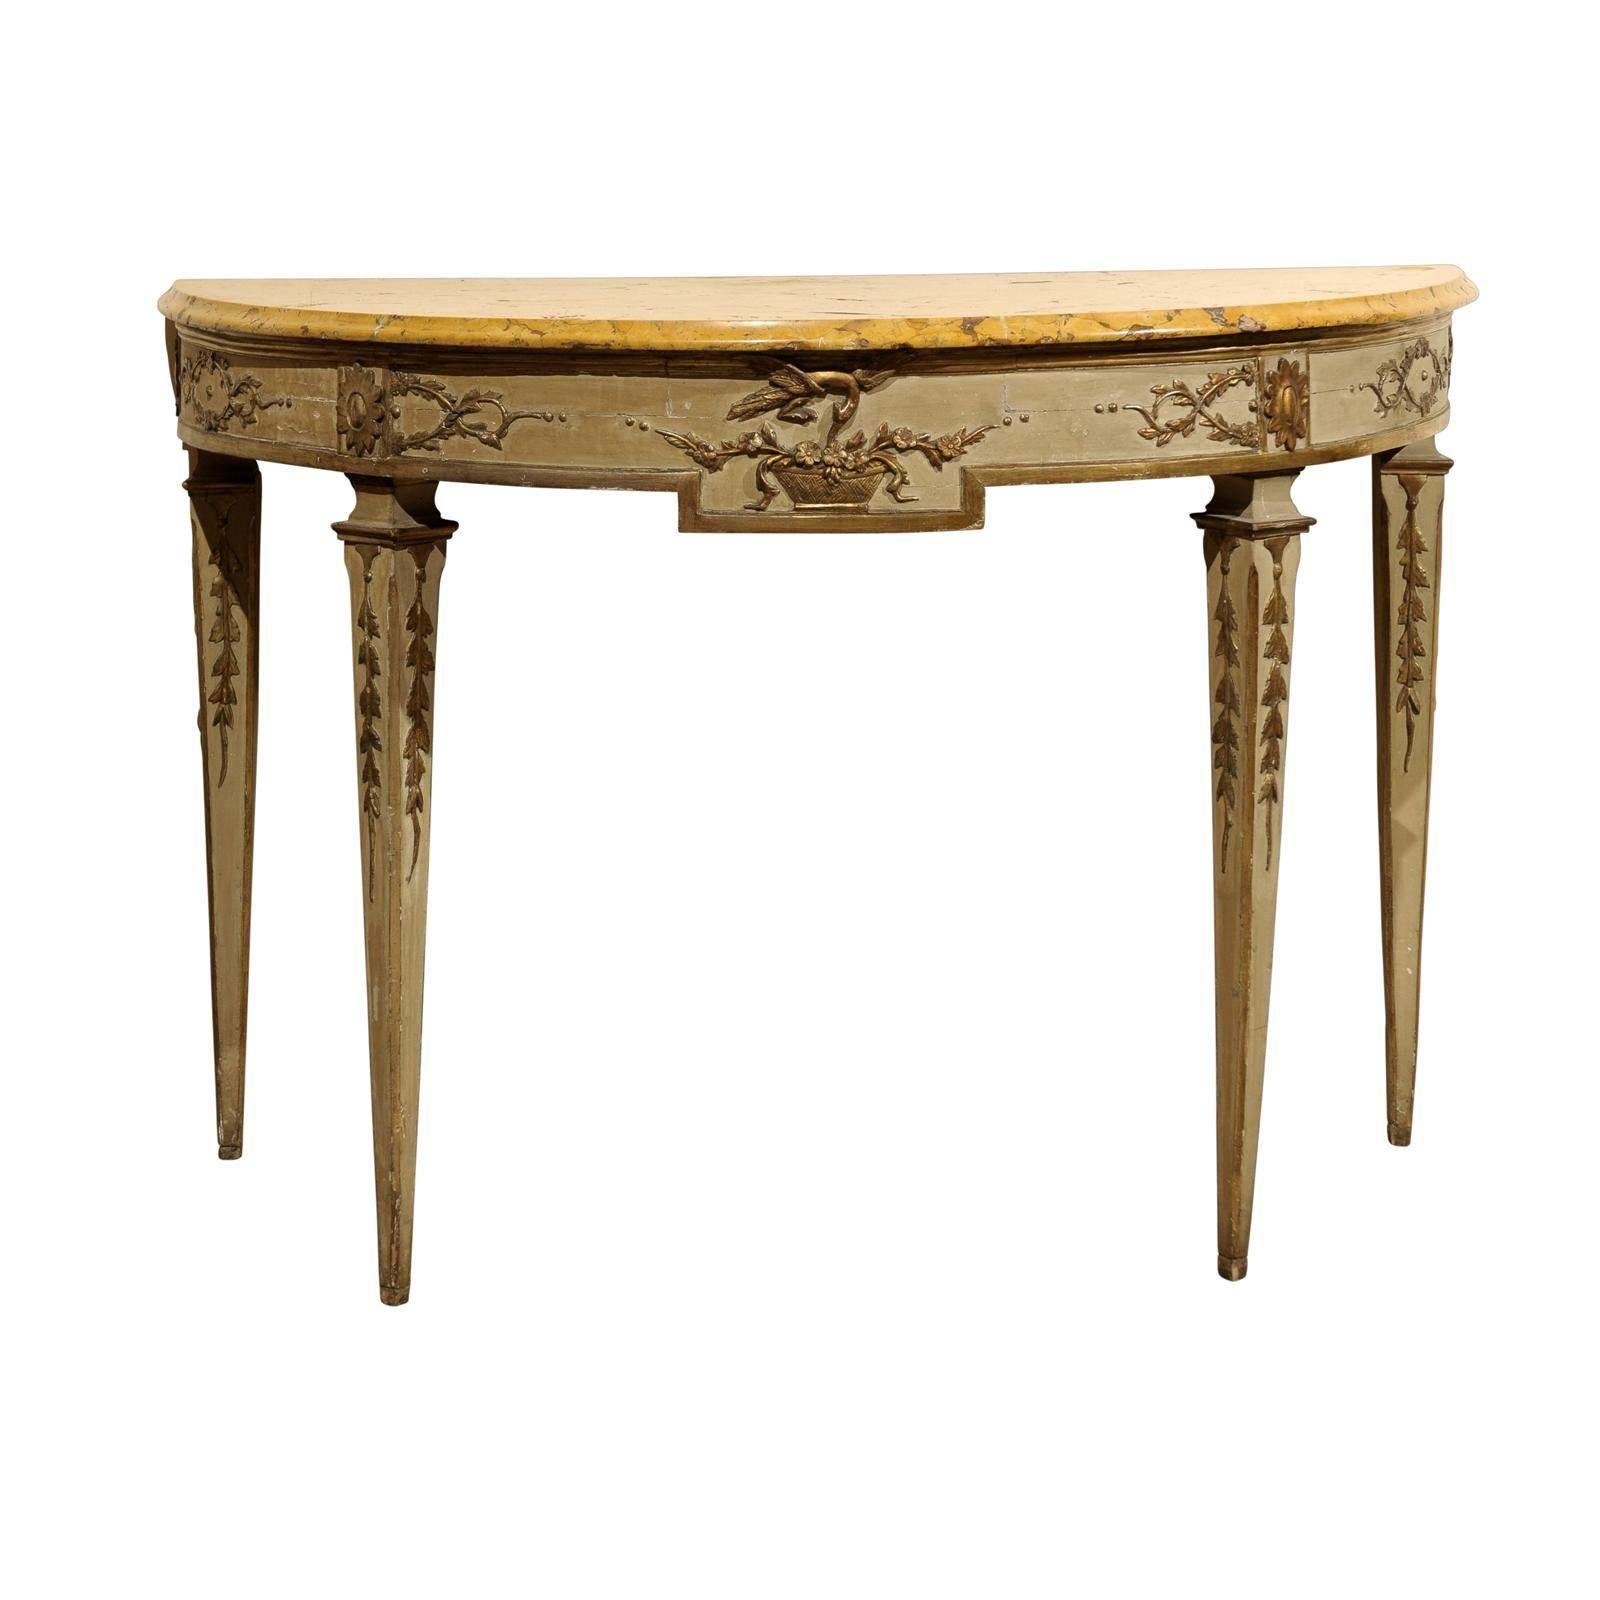 Large 18th Century Italian Neoclassical Painted and Parcel Gilt Console